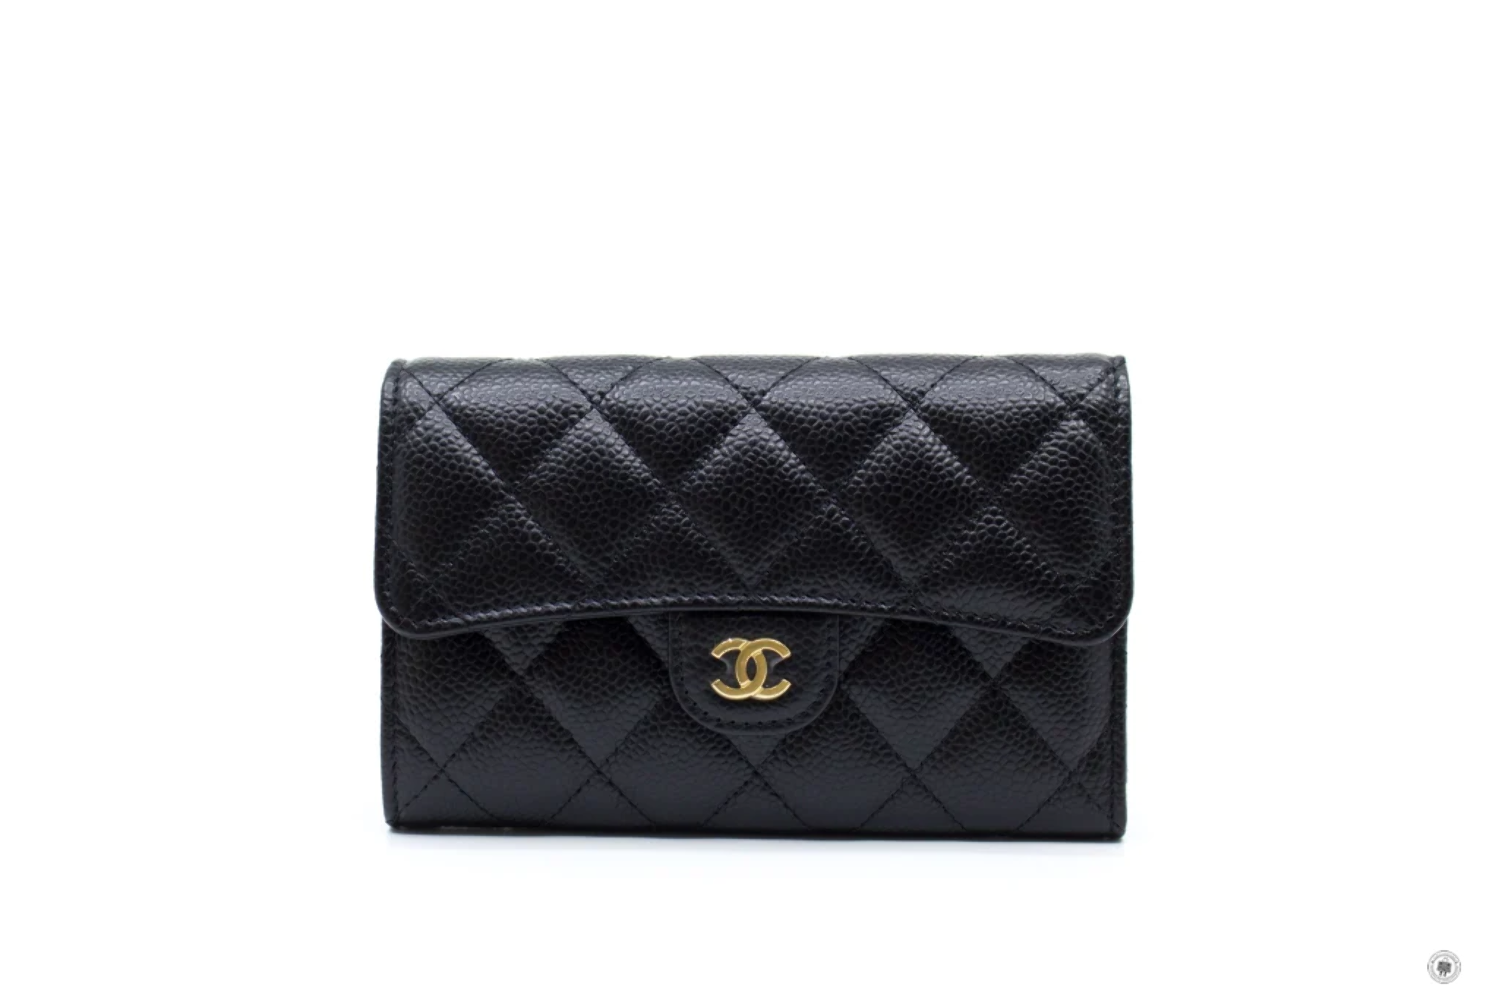 Shop CHANEL TIMELESS CLASSICS Classic Flap Wallet (AP0232) by Gioia（ジョイア）